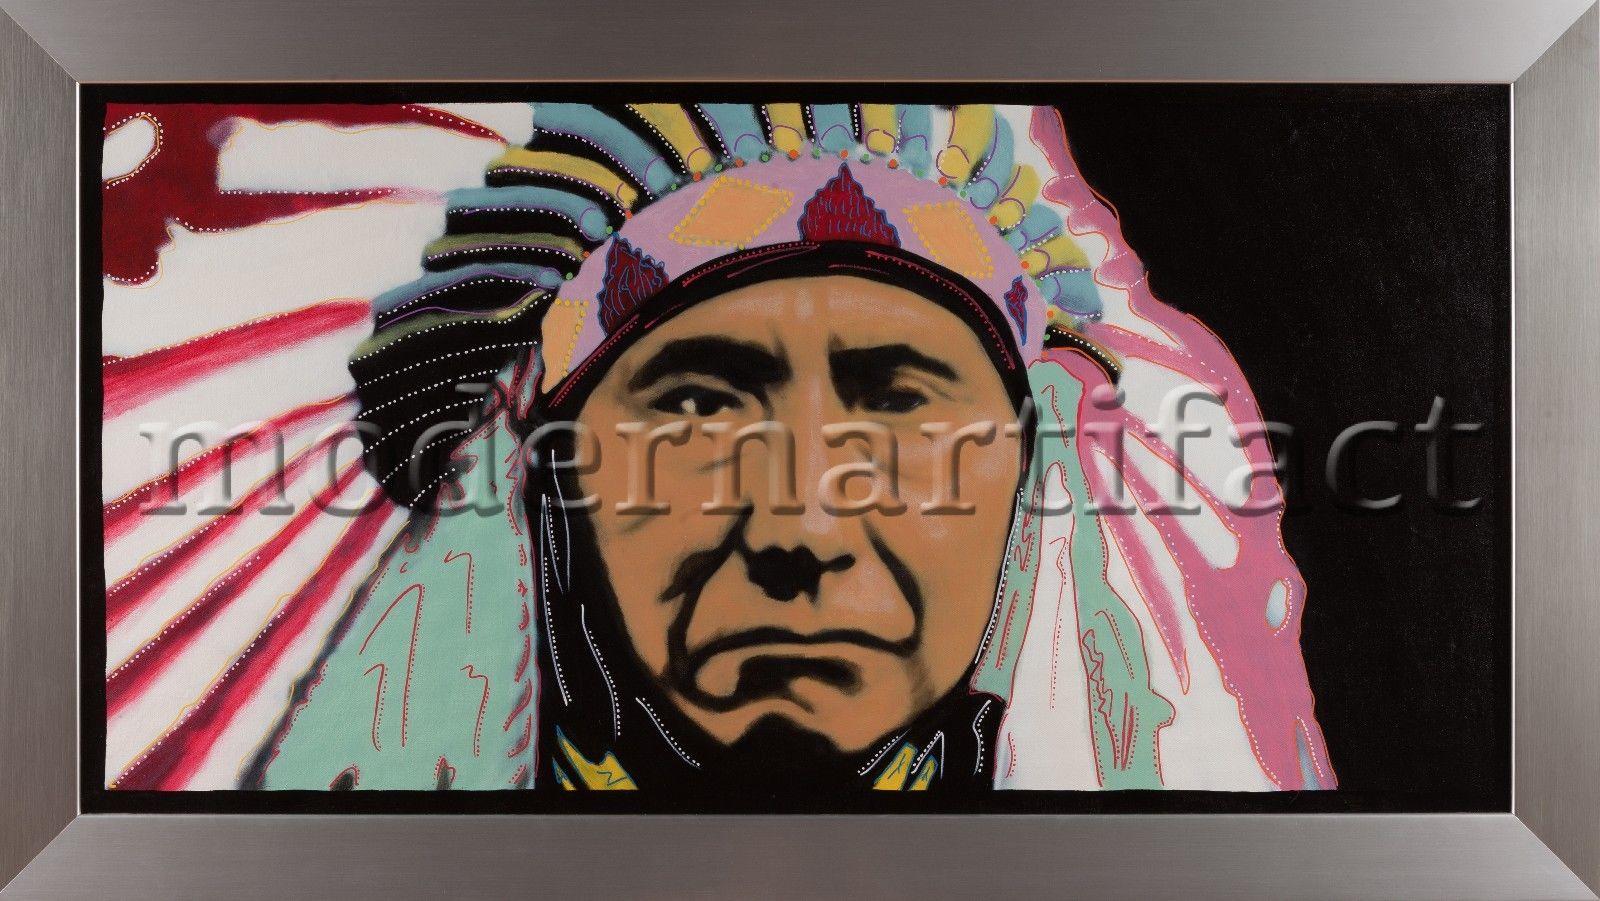 Artist: Steve Kaufman 
Title: Chief Joseph 
Medium: Original Oil Painting on Screen print Canvas 
Size: 25' x 49 1/16'' 
Size Framed: 30 7/8' x 55' 
Edition size: This is a Unique with the original COA less than 5 made of these original hand painted